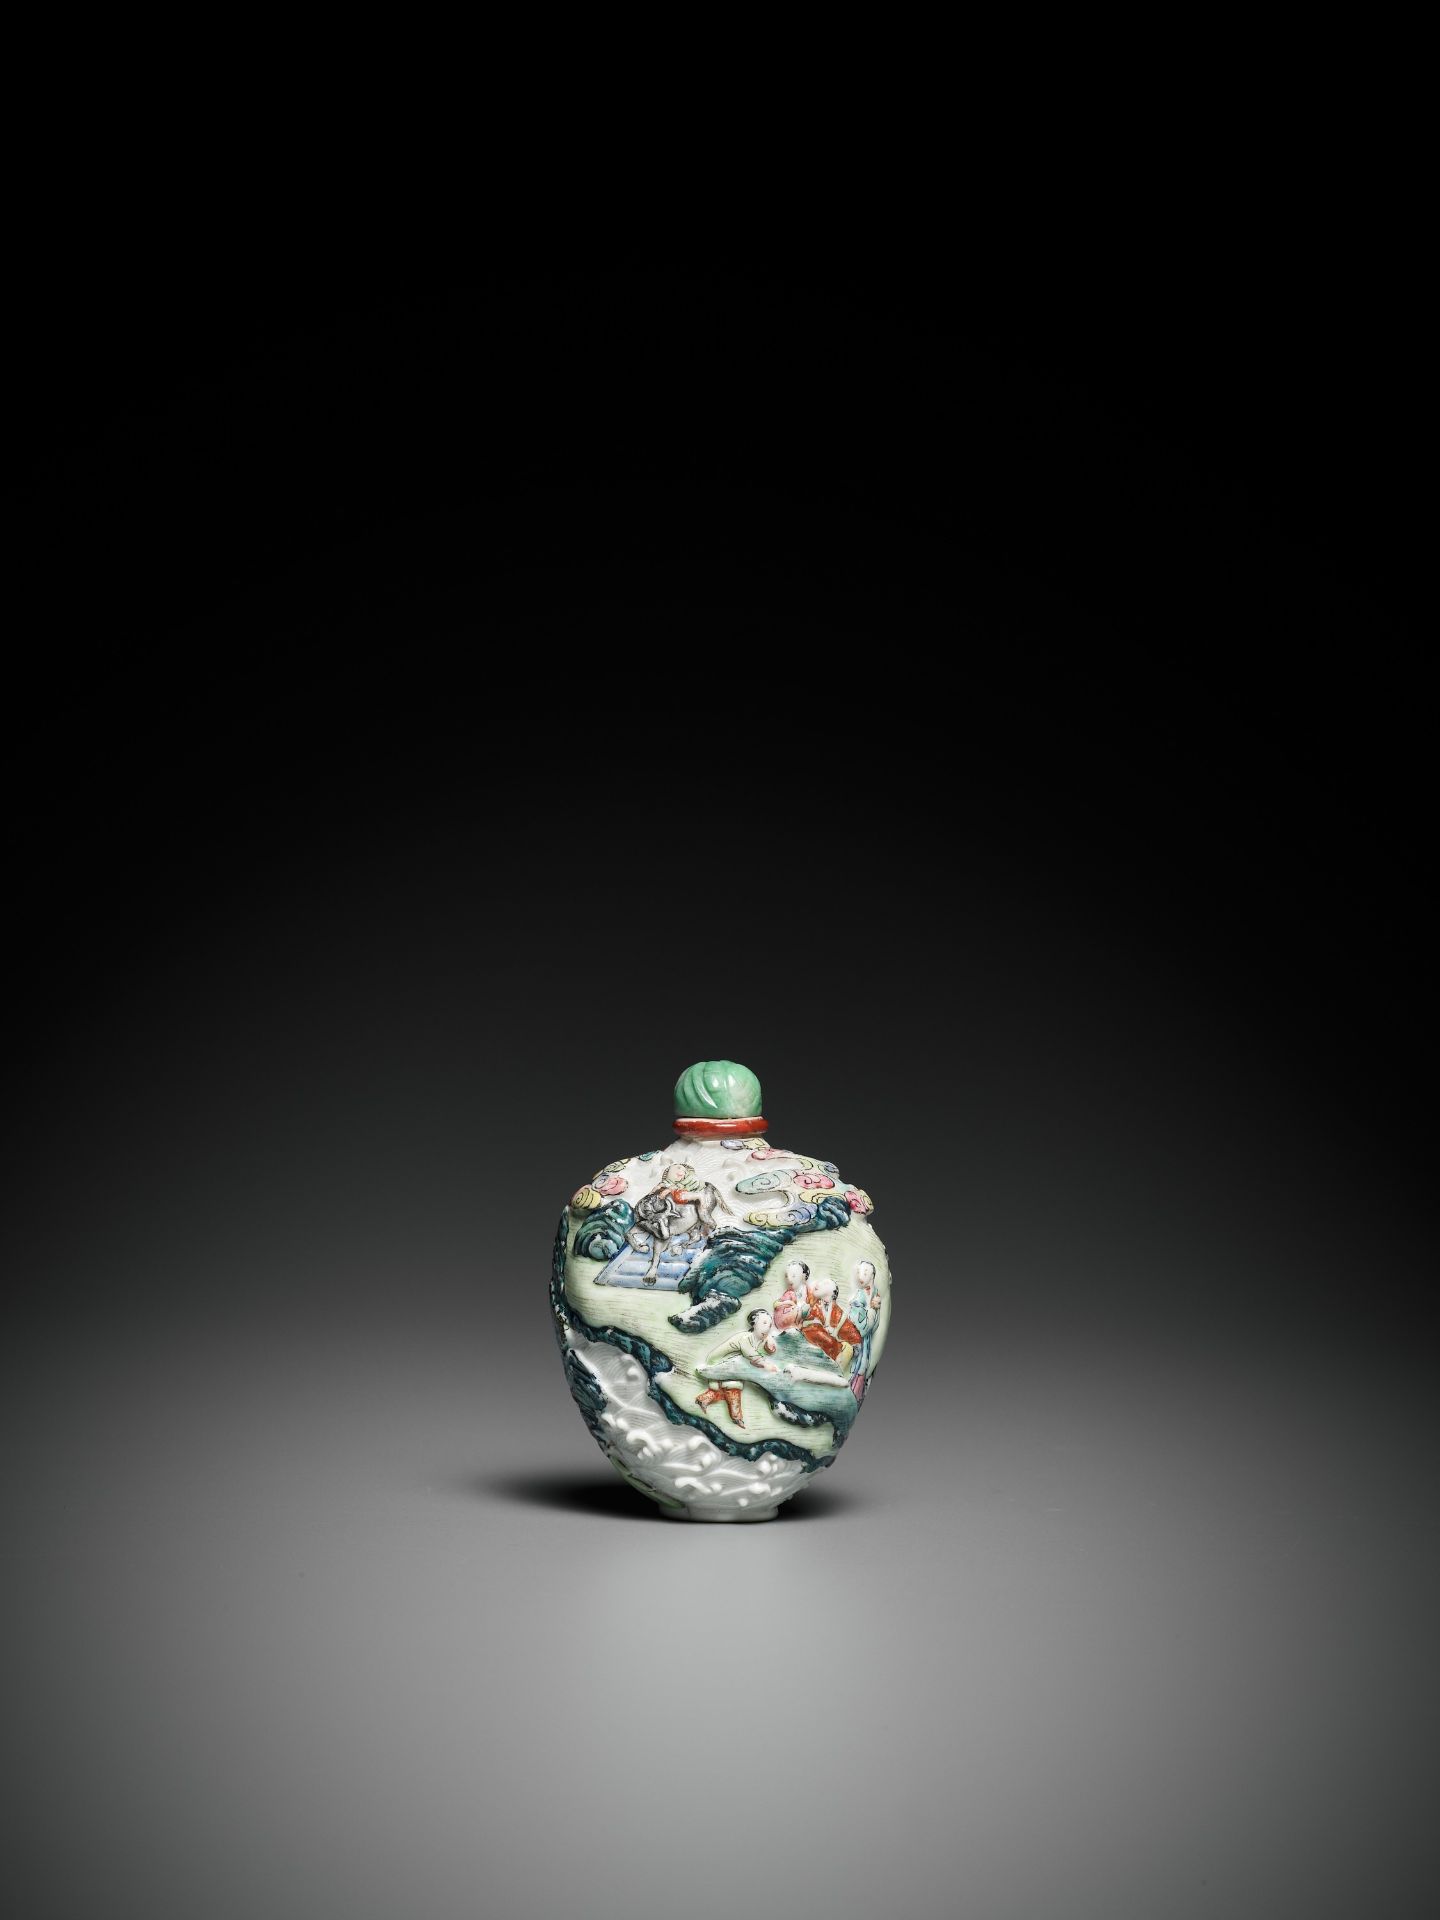 AN IMPERIAL MOLDED AND ENAMELED PORCELAIN SNUFF BOTTLE, JIAQING MARK AND PERIOD - Image 2 of 8